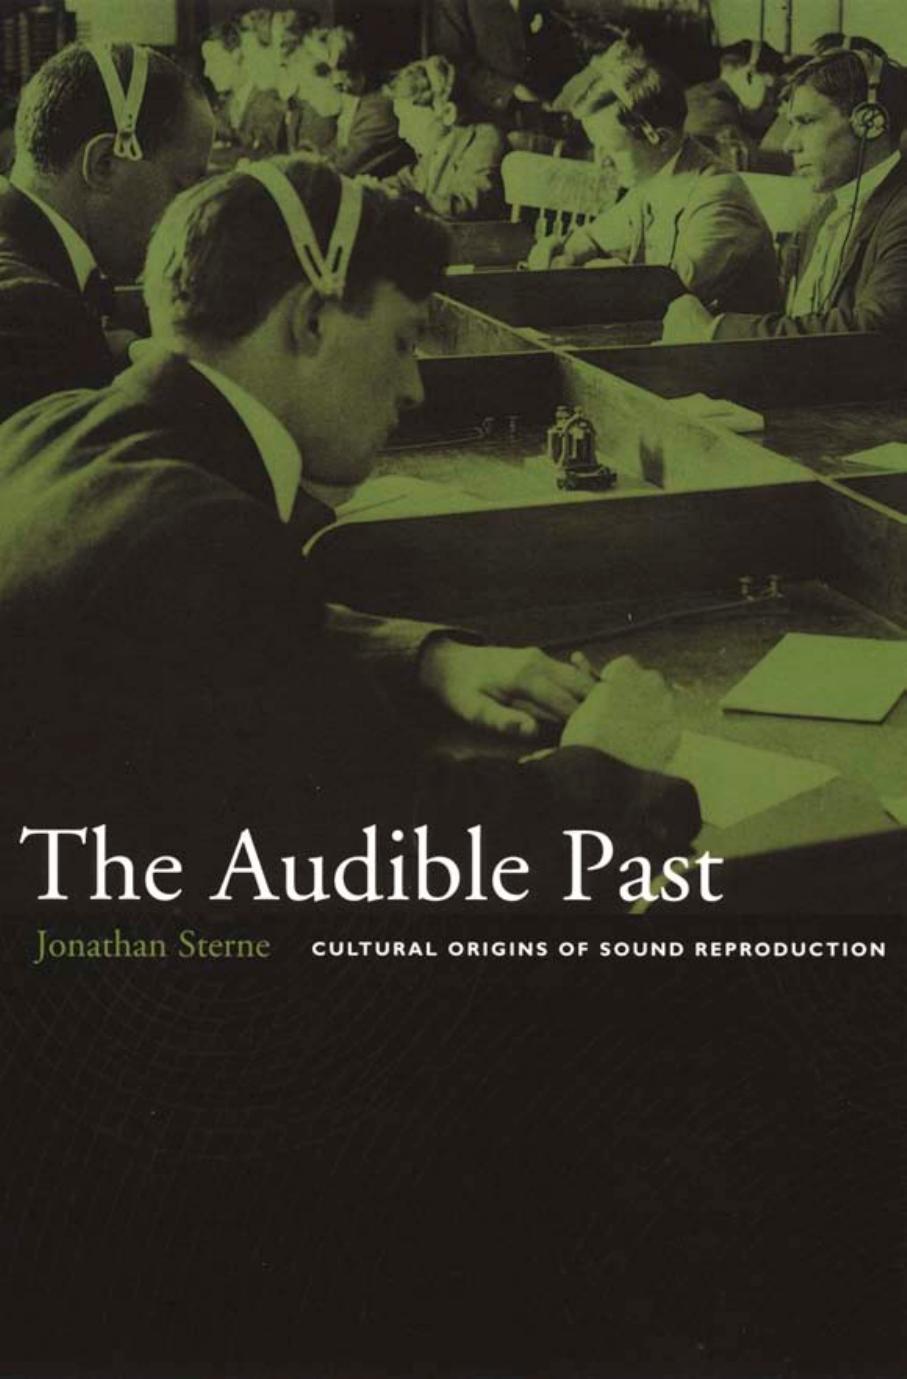 The Audible Past: Cultural Origins of Sound Reproduction by Jonathan Sterne